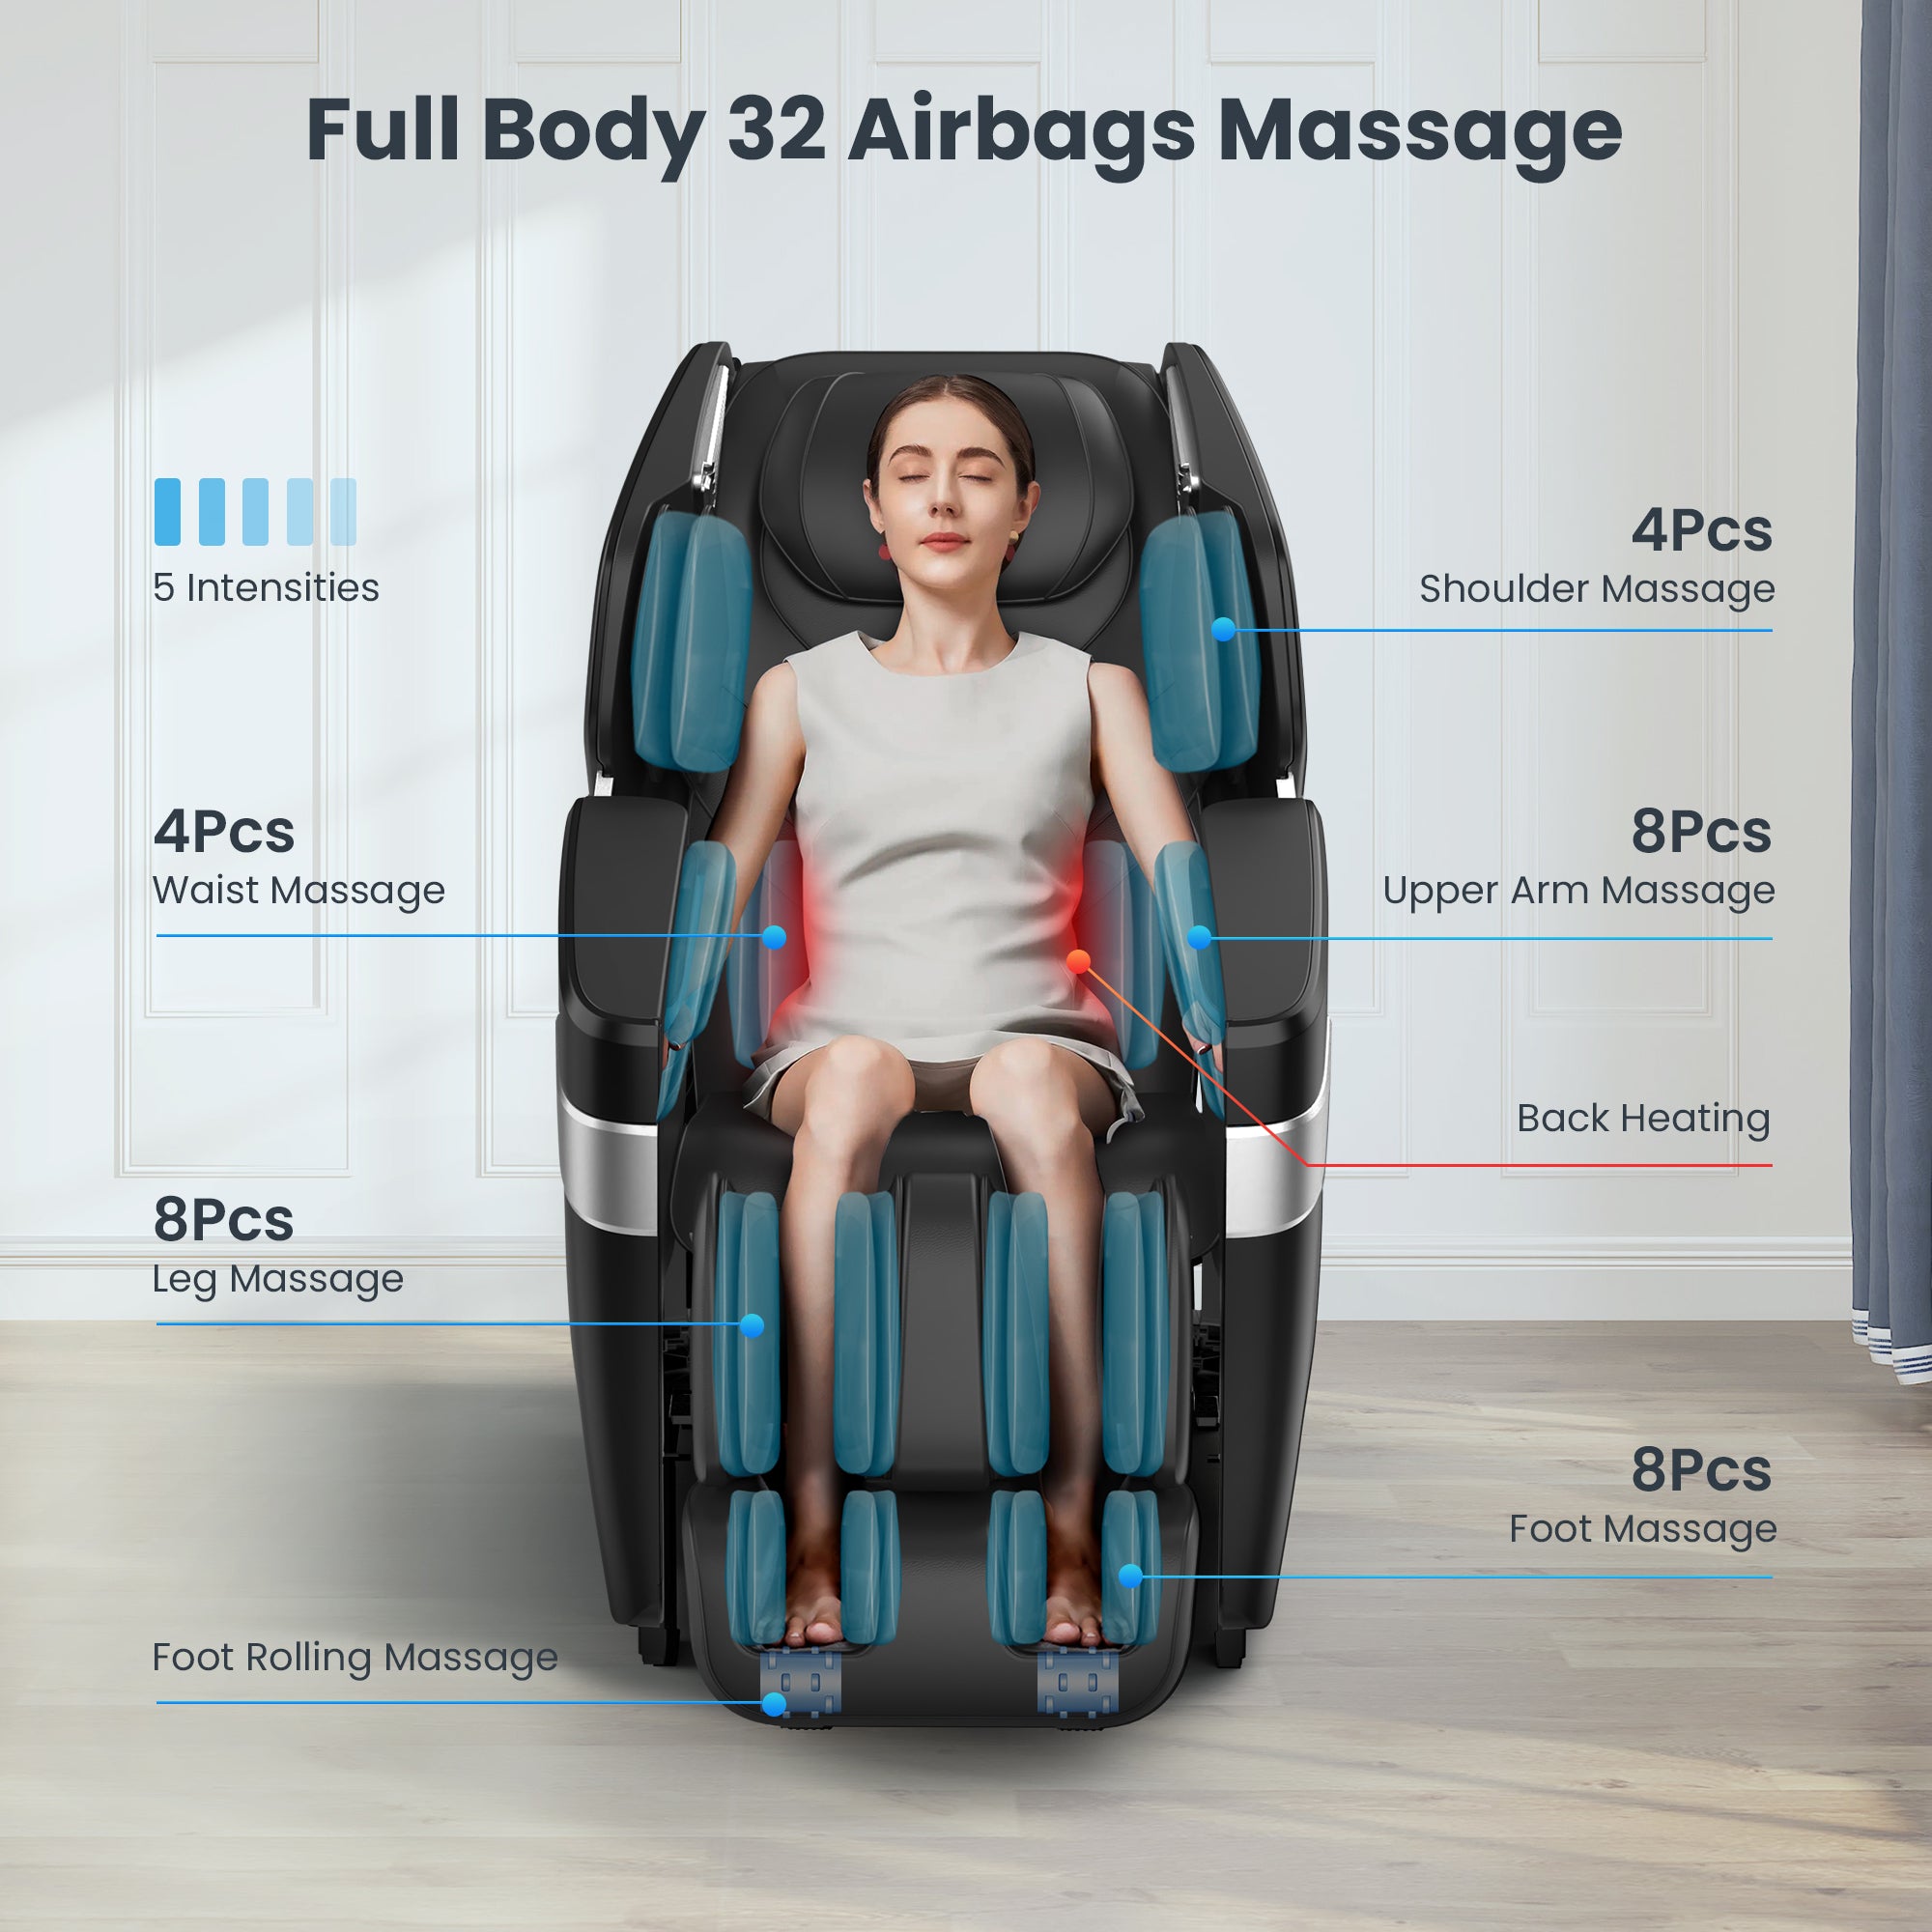 COMFIER Zero Gravity Massage Chair Full Body, Electric Shiatsu Massage Chair Recliner with Foot and Sole Rollers, Built-in Heat Therapy Air Pressure Stretch Massage for Home Office- CF-9320